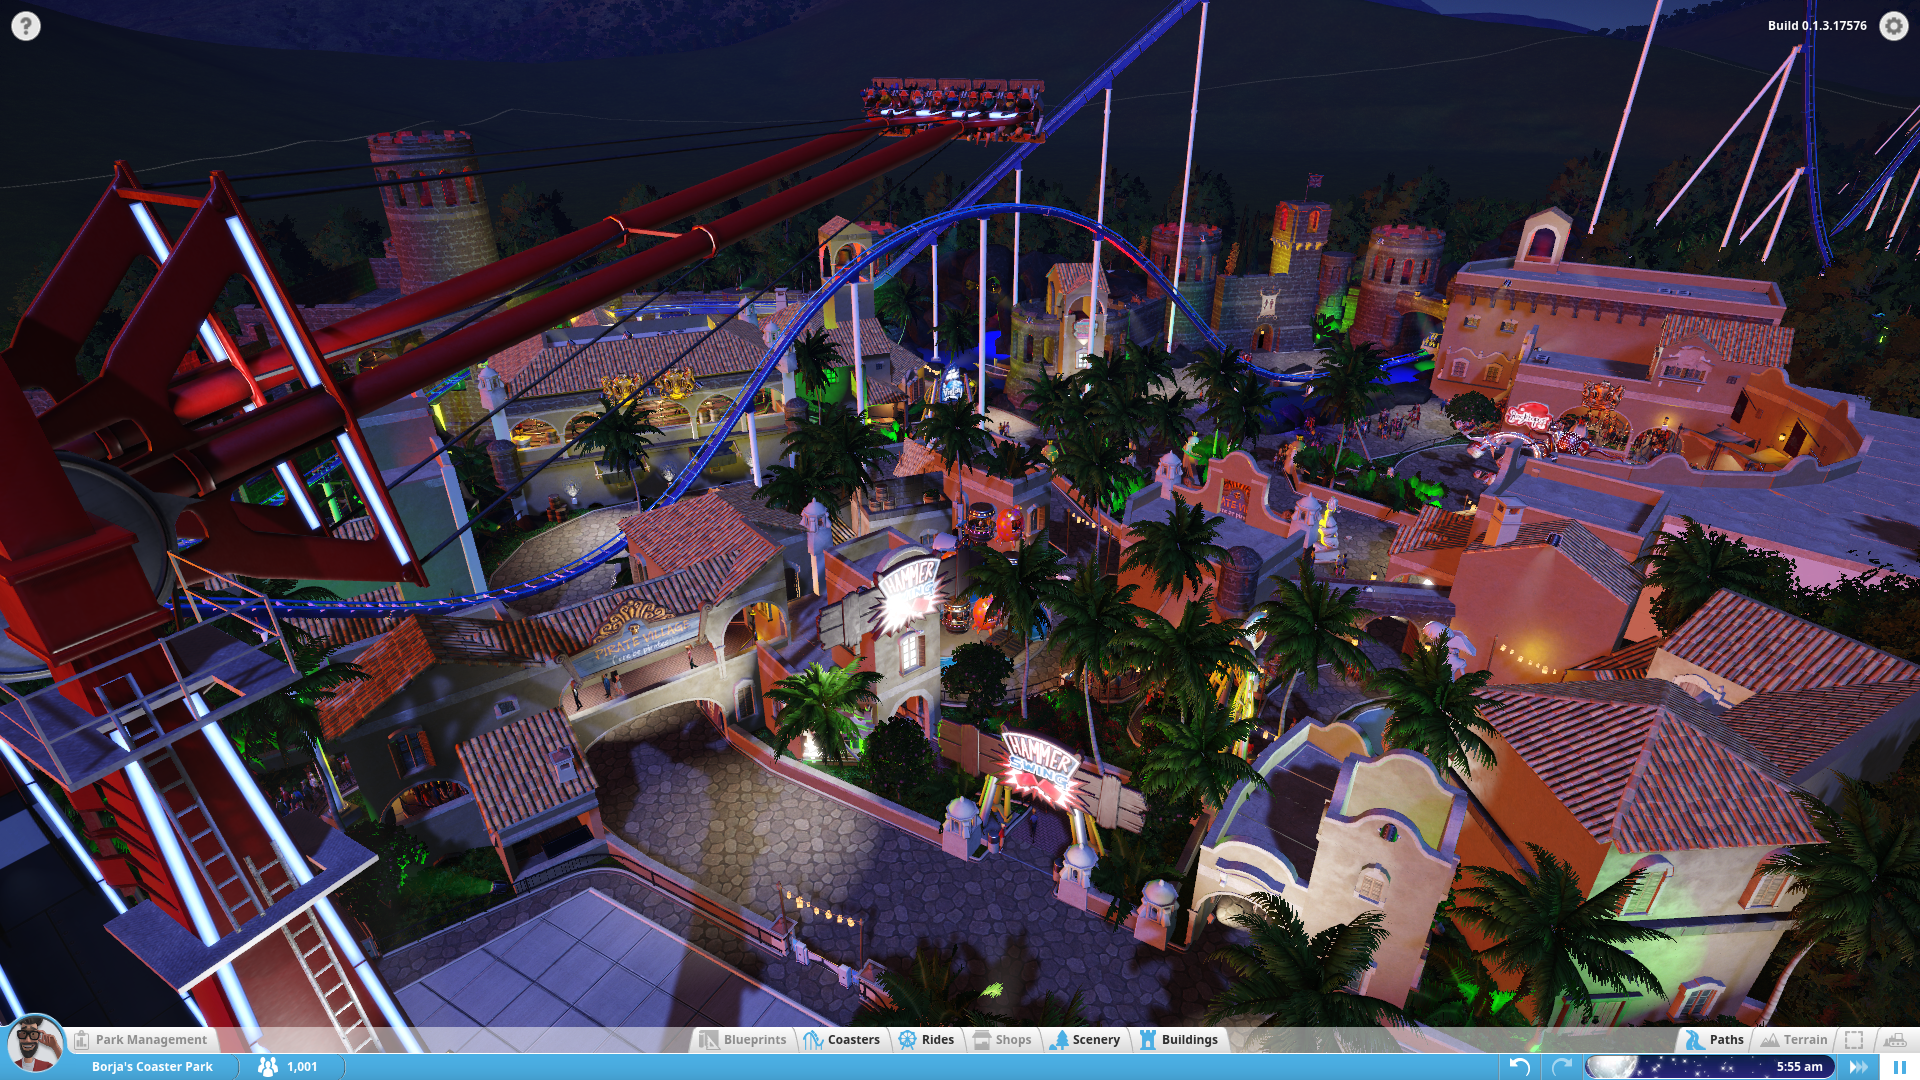 planetcoaster2016-04-5au3s.png